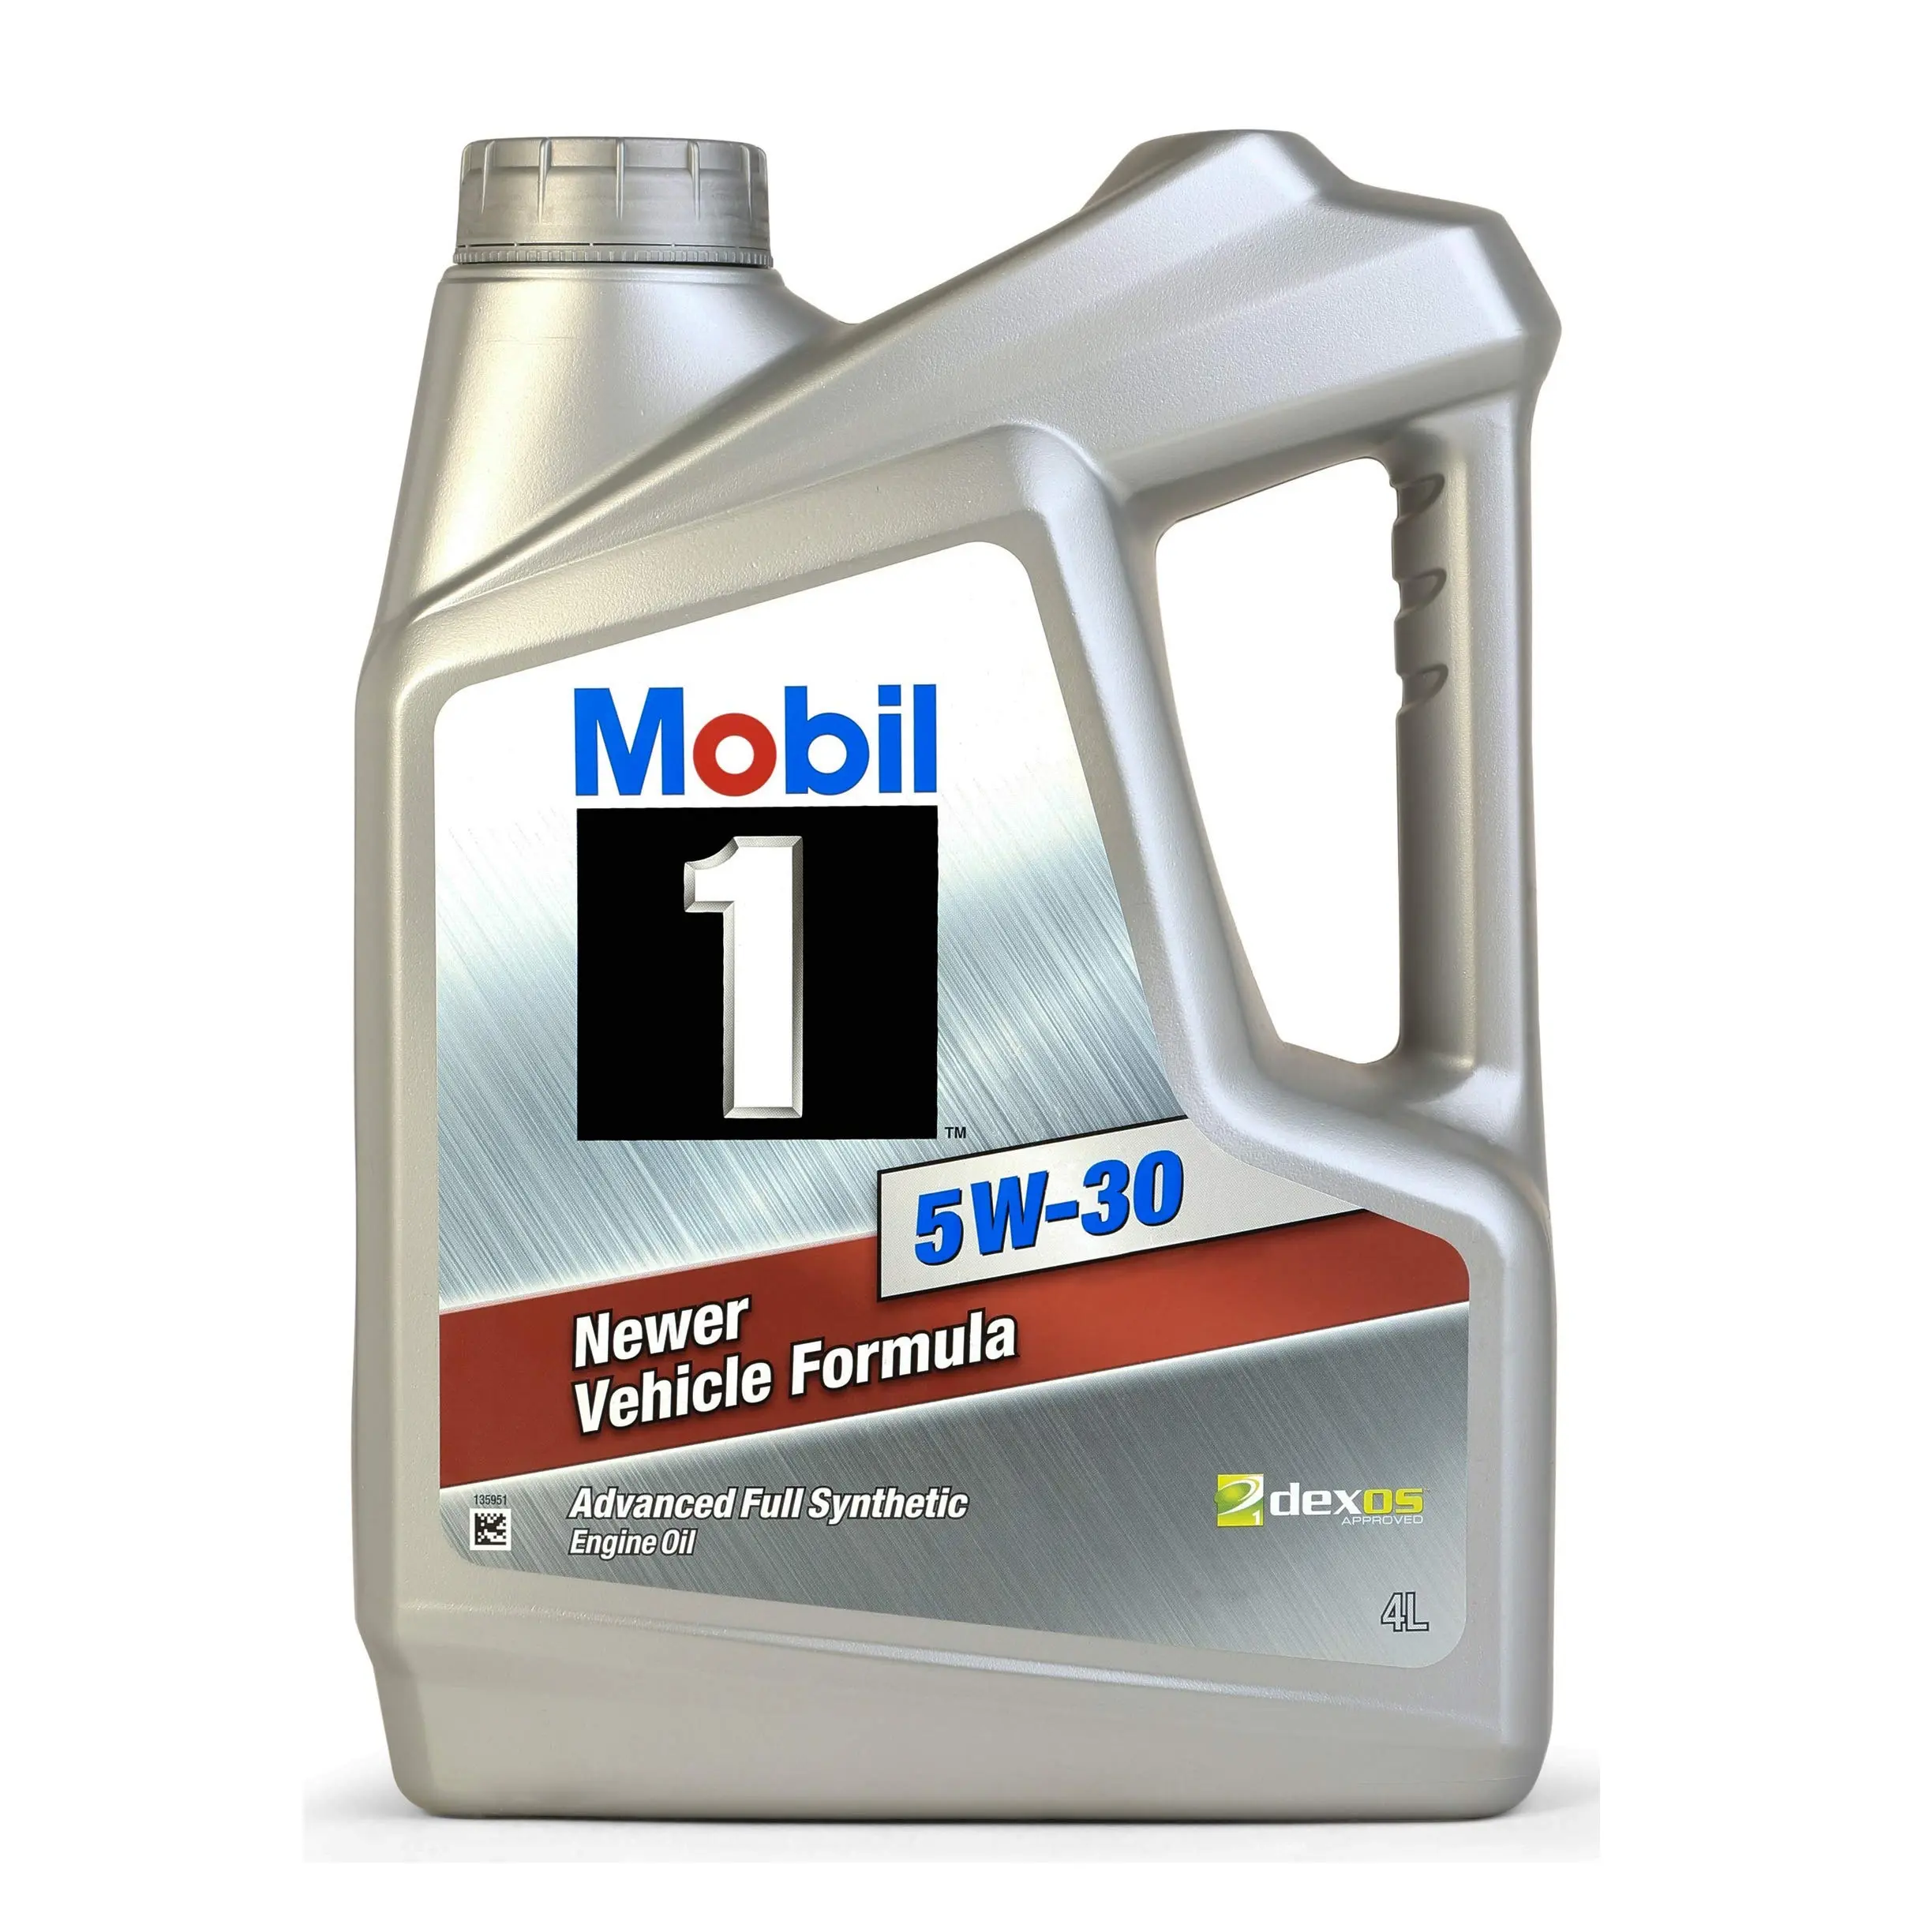 MOBIL 1 5W30 DEXOS Full Synthetic Engine Oil 6 Pack x 1 Quart Formulation with Balanced Additive System at Wholesale Price